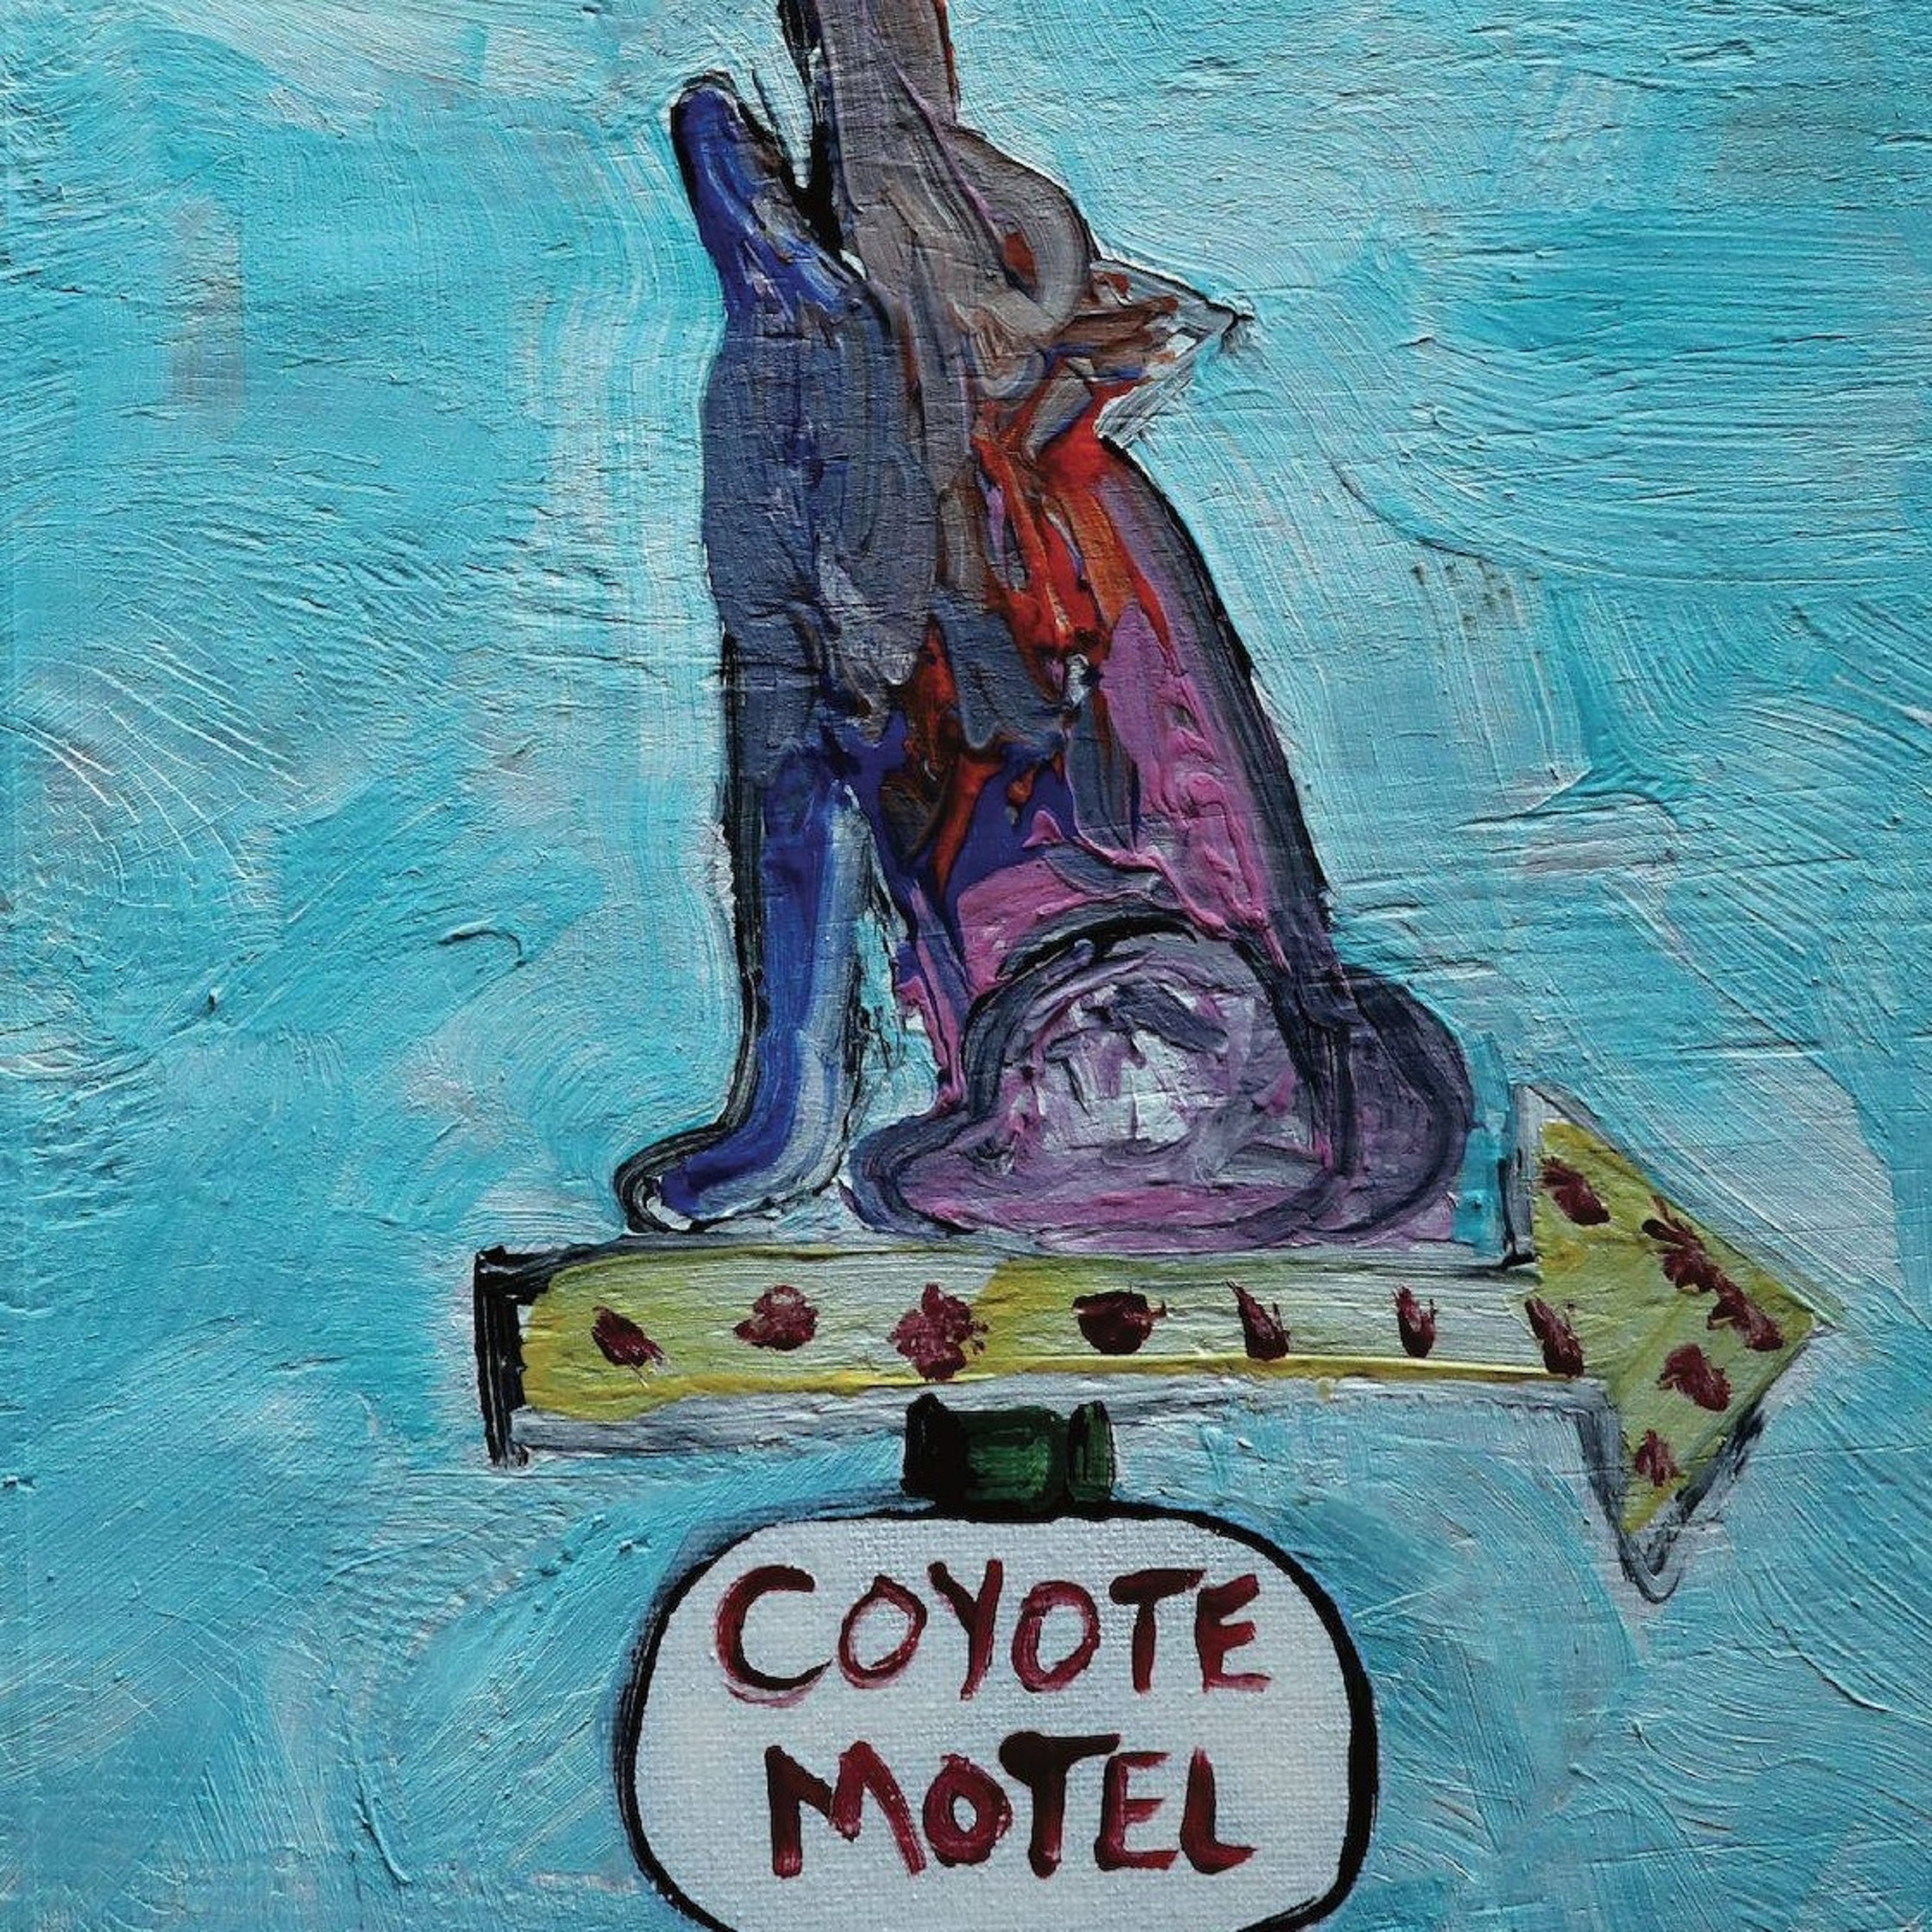 Coyote Motel Announces Soundtrack Release and Premiere for "The River: A Songwriter’s Stories of the South"